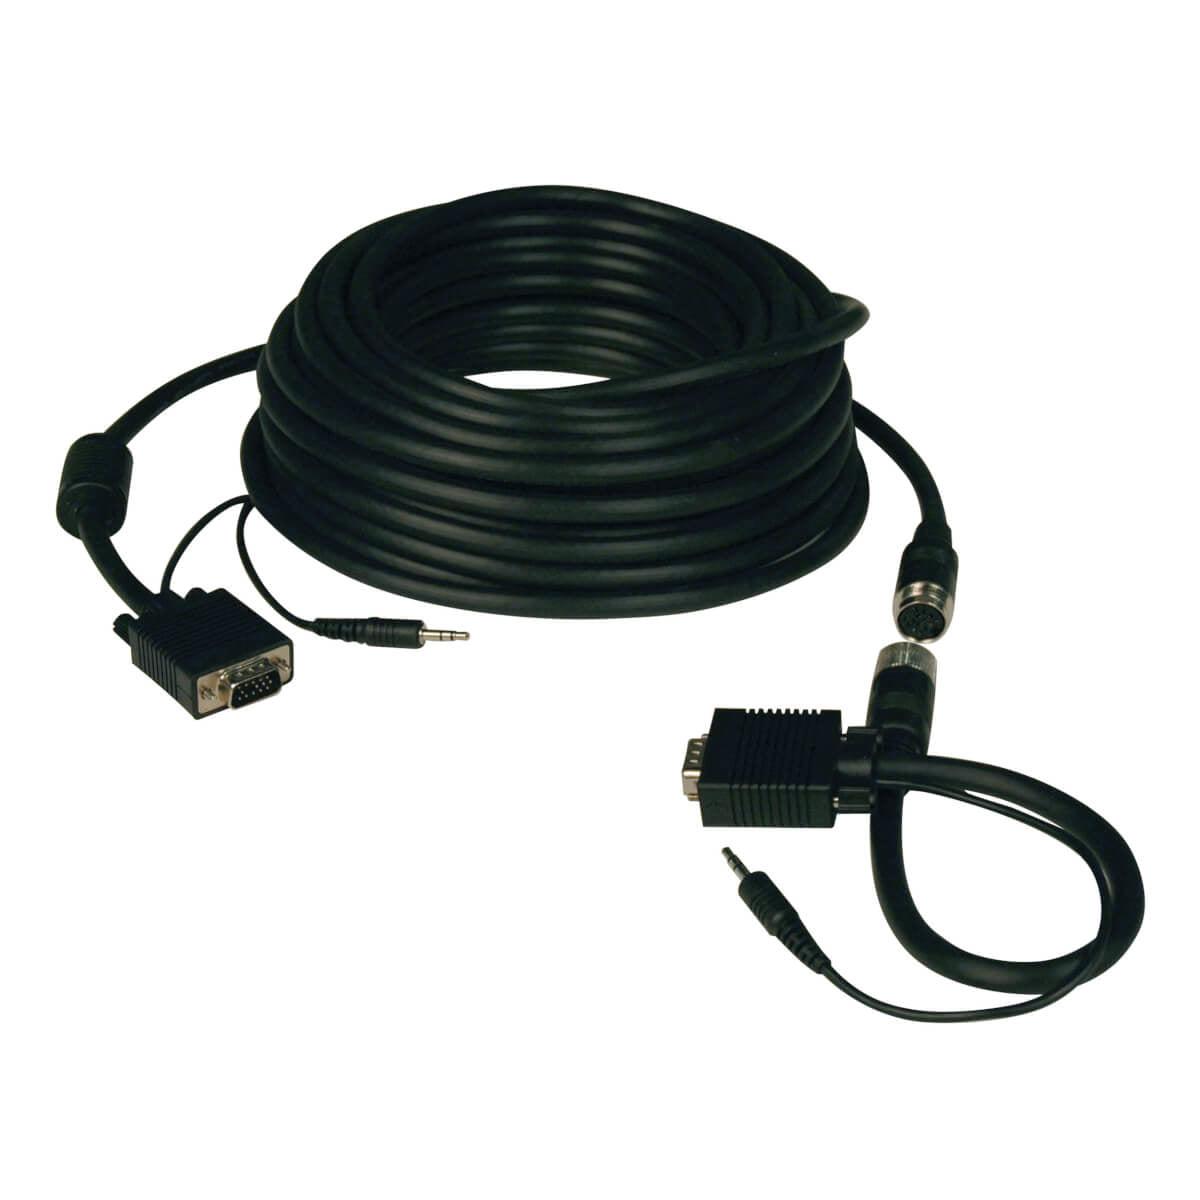 Tripp Lite P504-050-Ez High Resolution Svga/Vga Monitor Easy Pull Cable With Audio And Rgb Coaxial (Hd15 M/M), 50 Ft. (15.24 M)